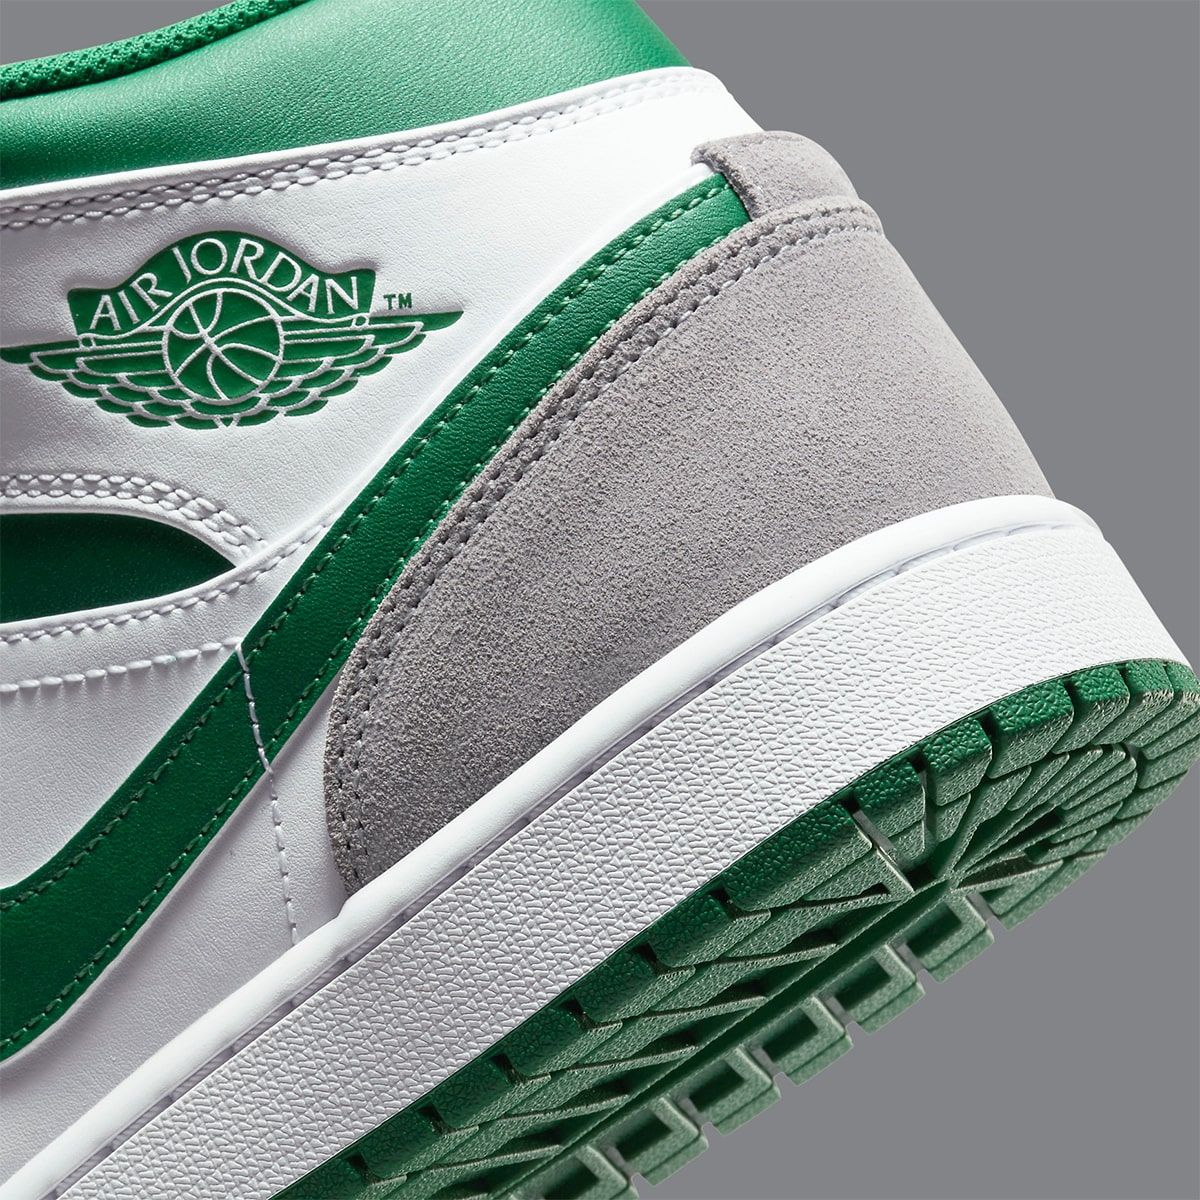 Air Jordan 1 Mid Appears in White, Grey and Pine Green | HOUSE OF HEAT